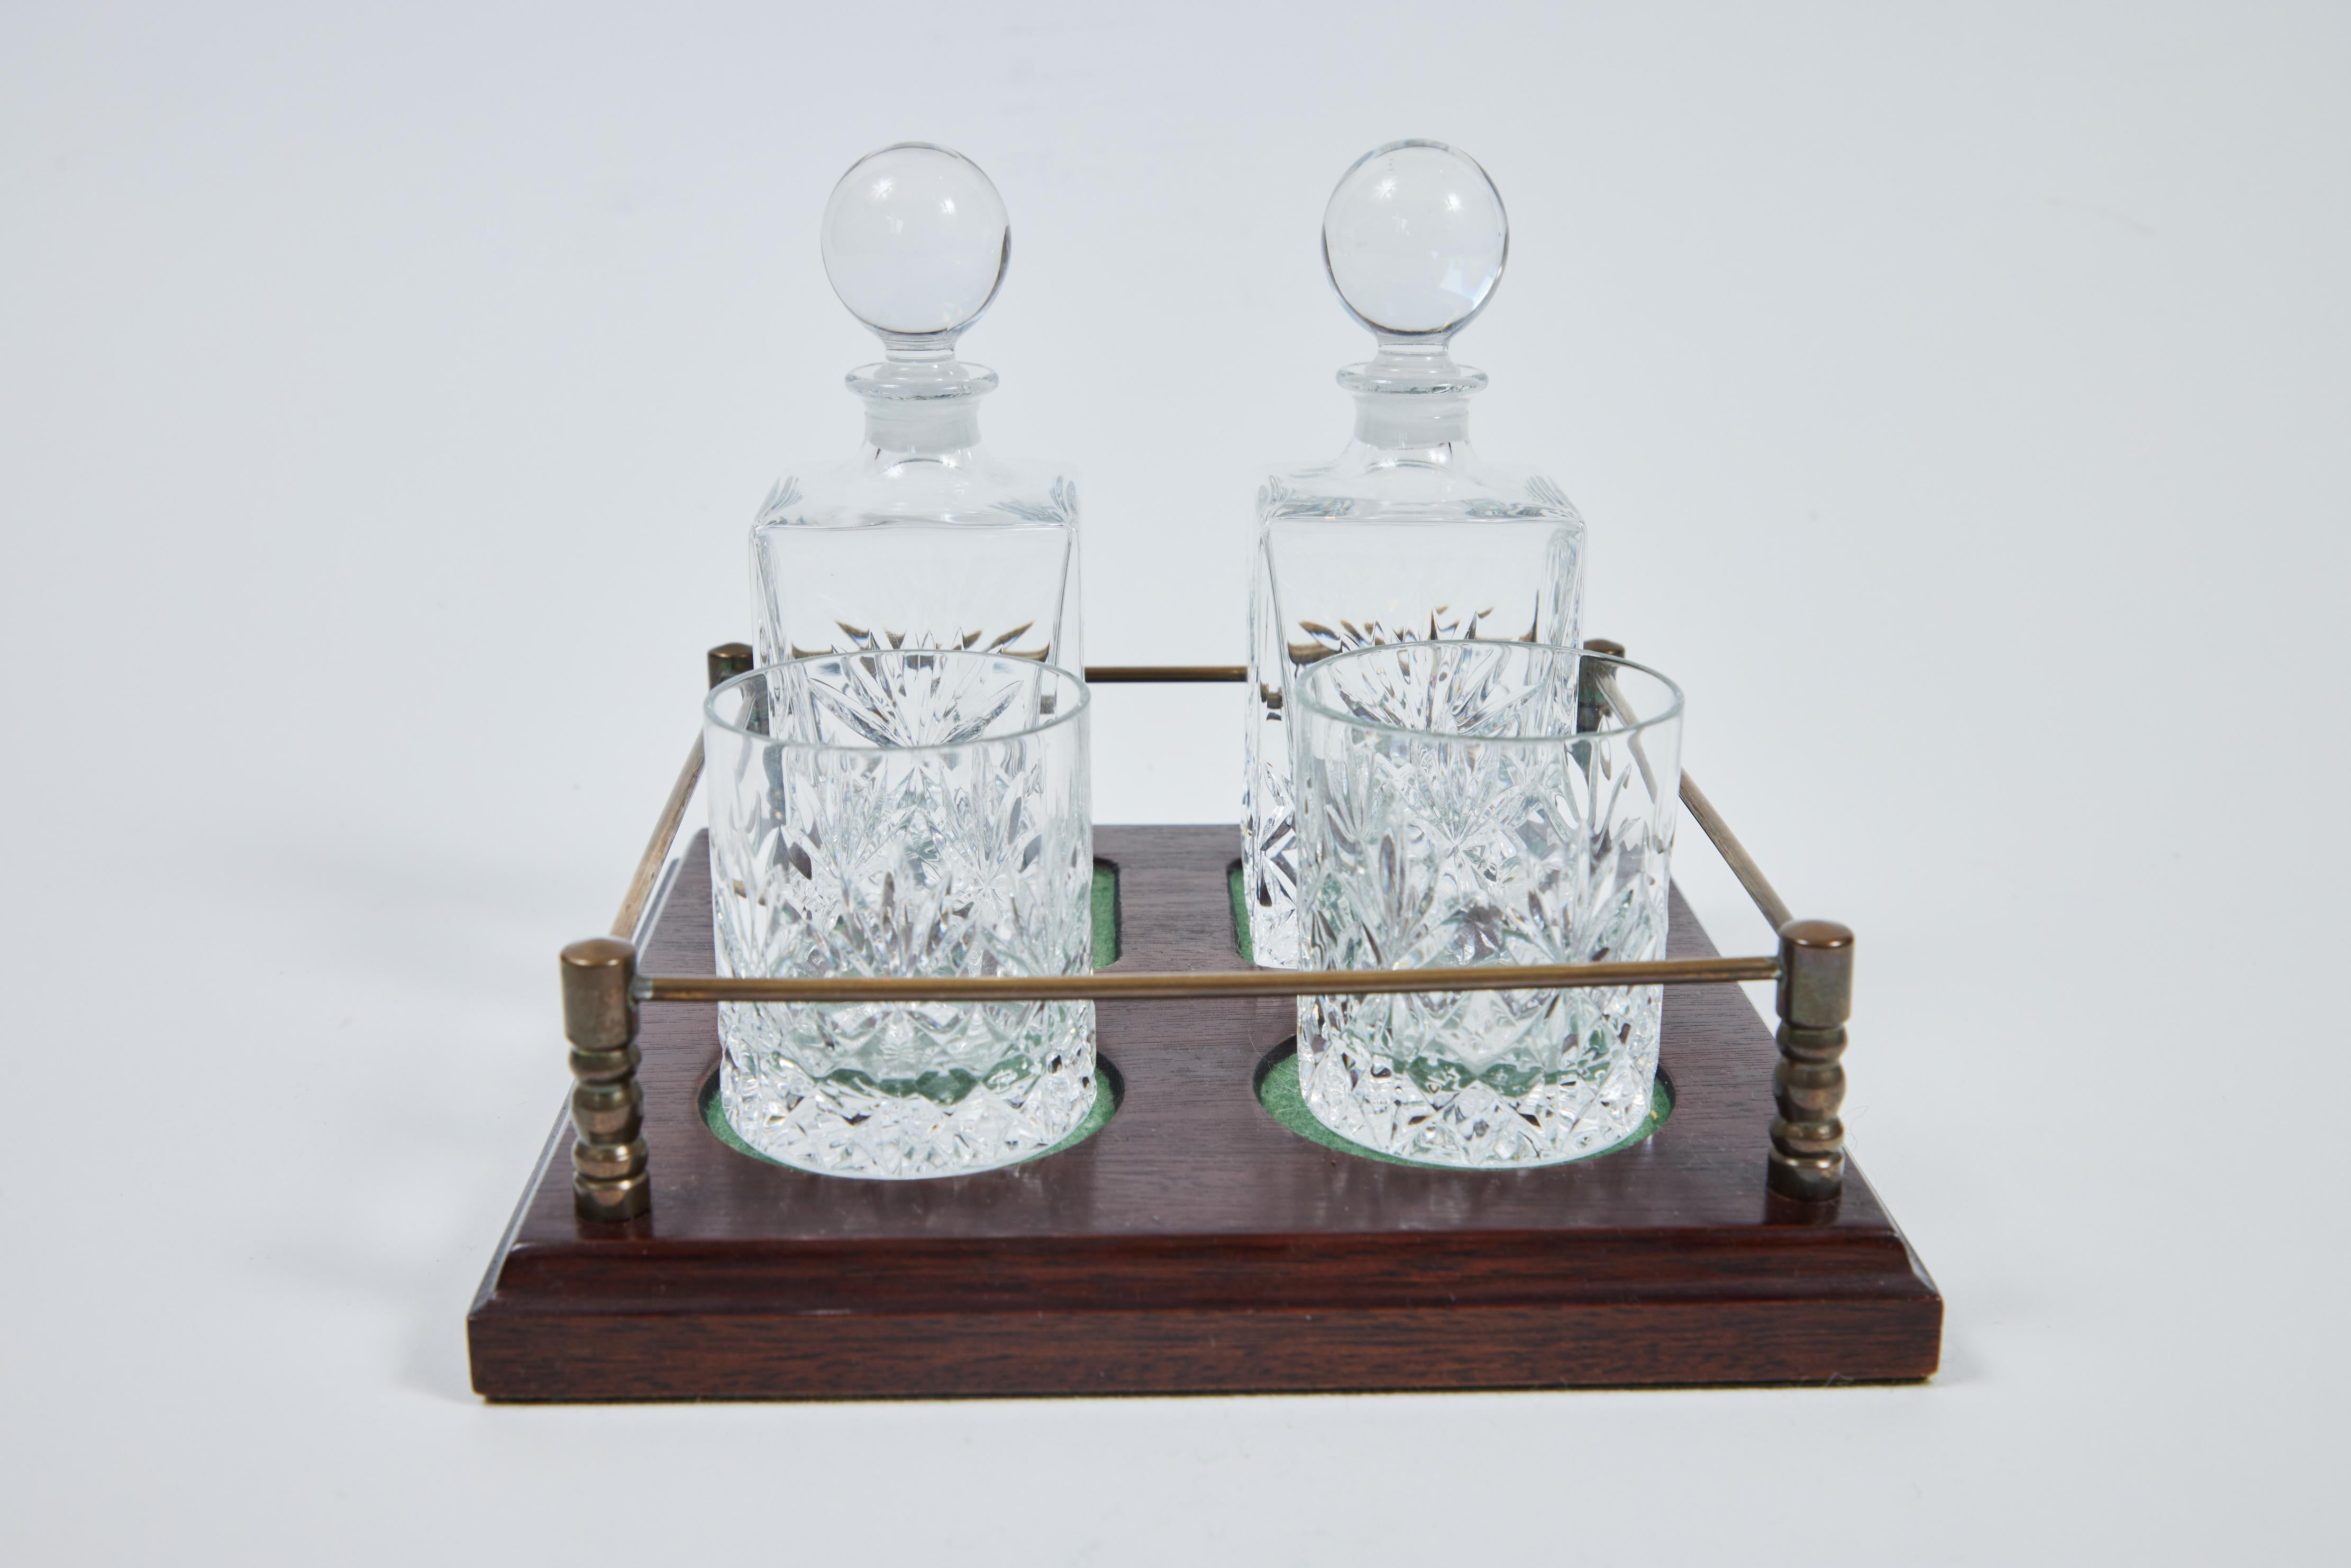 Vintage cut crystal nightcap set on a wood stand with brass gallery rail, includes 2 decanters + glasses and tray.

7 1/8